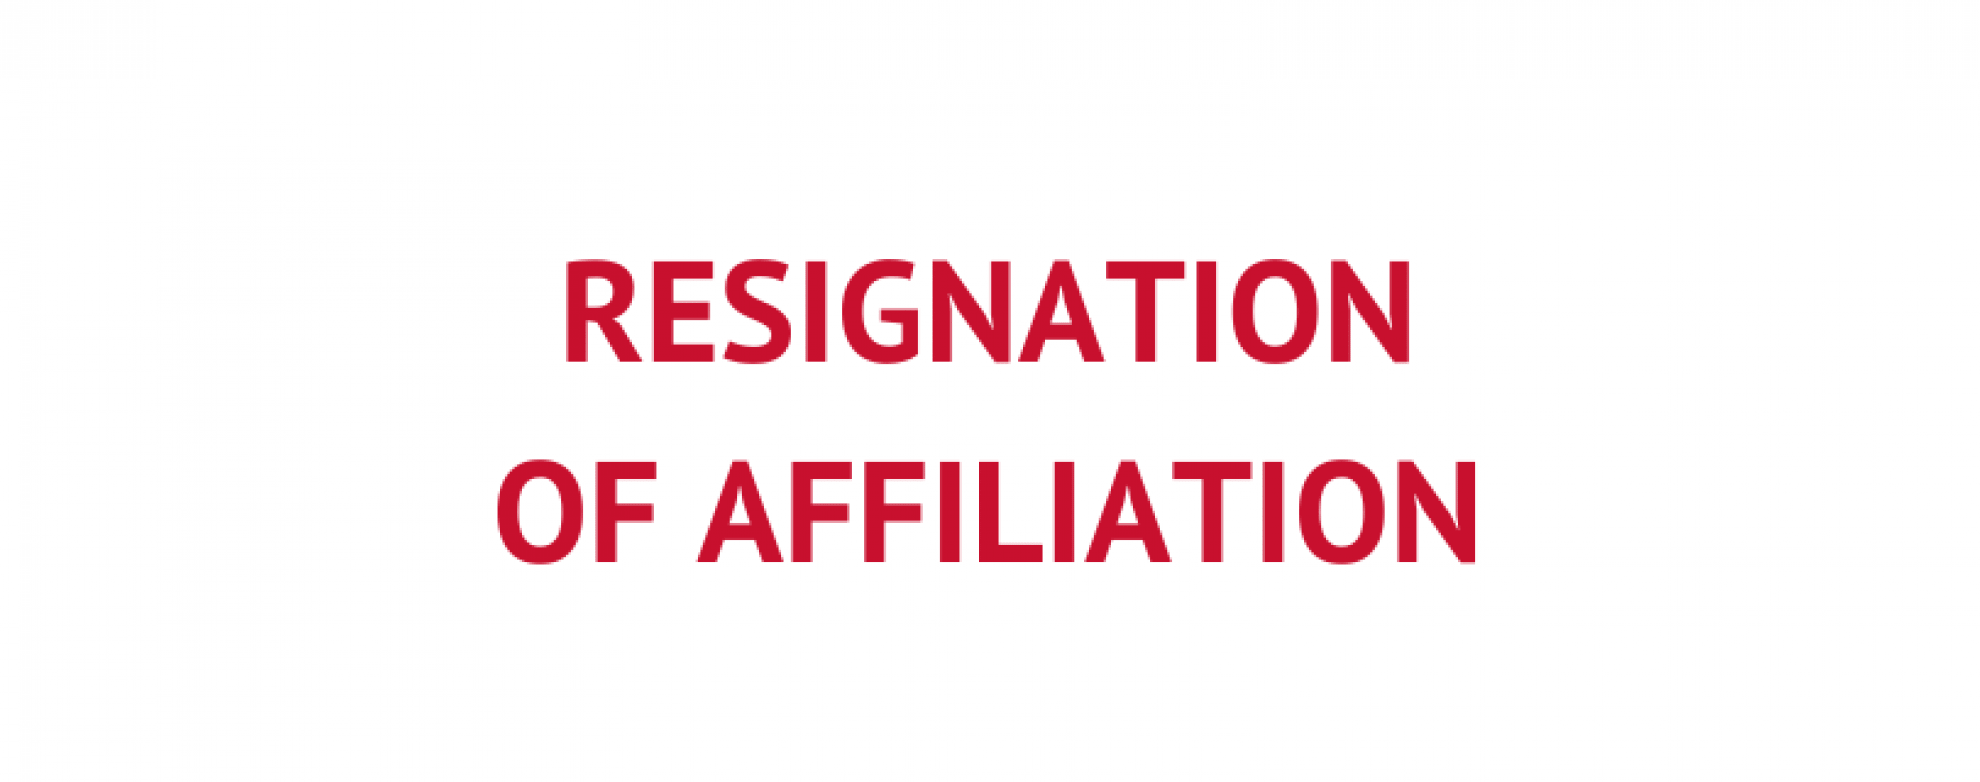 Resignation of Affiliation - American Services S.R.L